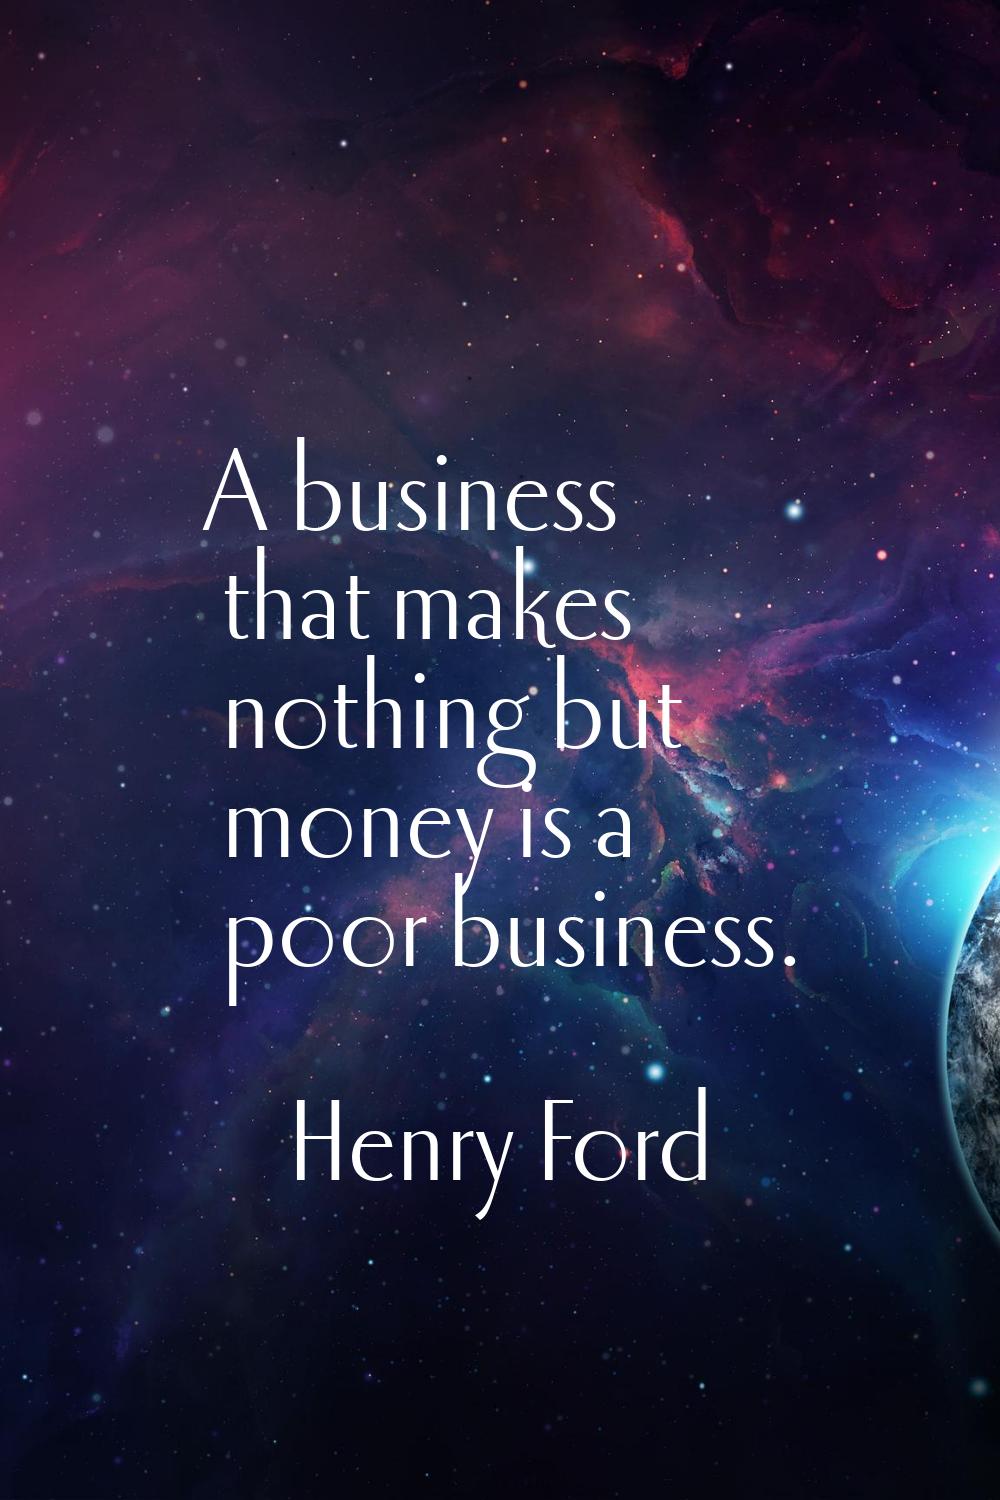 A business that makes nothing but money is a poor business.